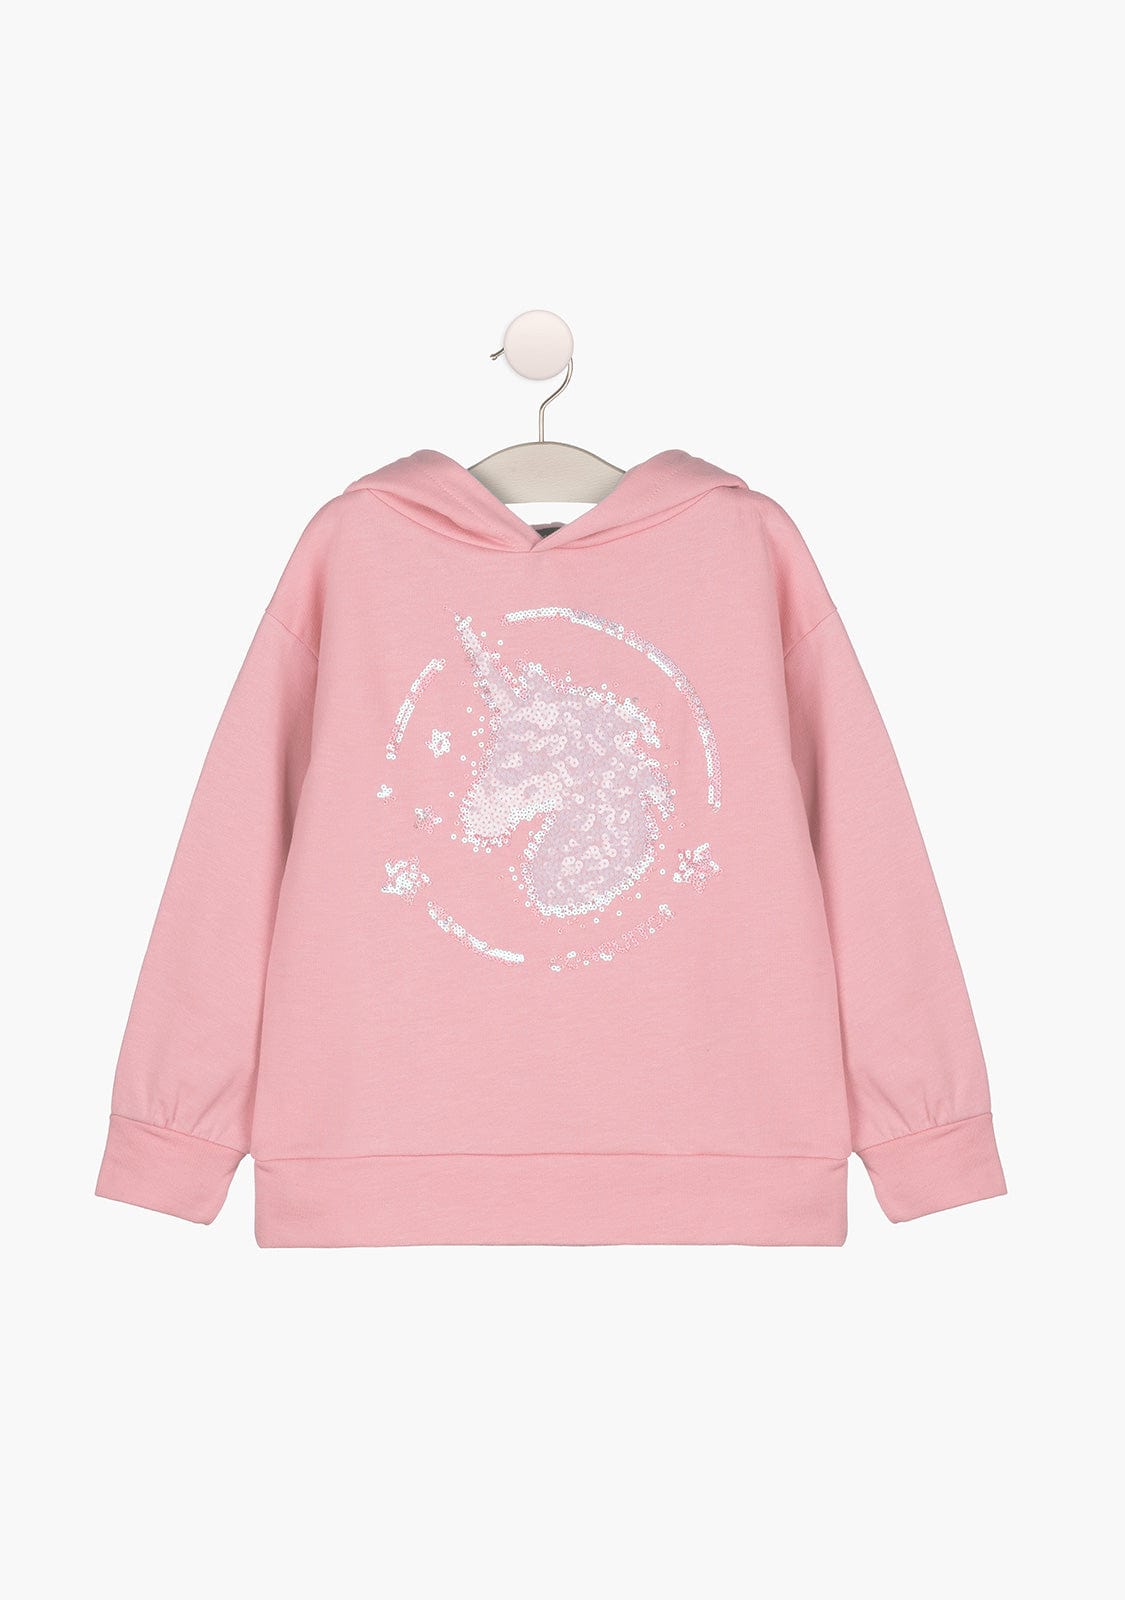 CONGUITOS TEXTIL Clothing Girl's Pink Unicorn Hoodie